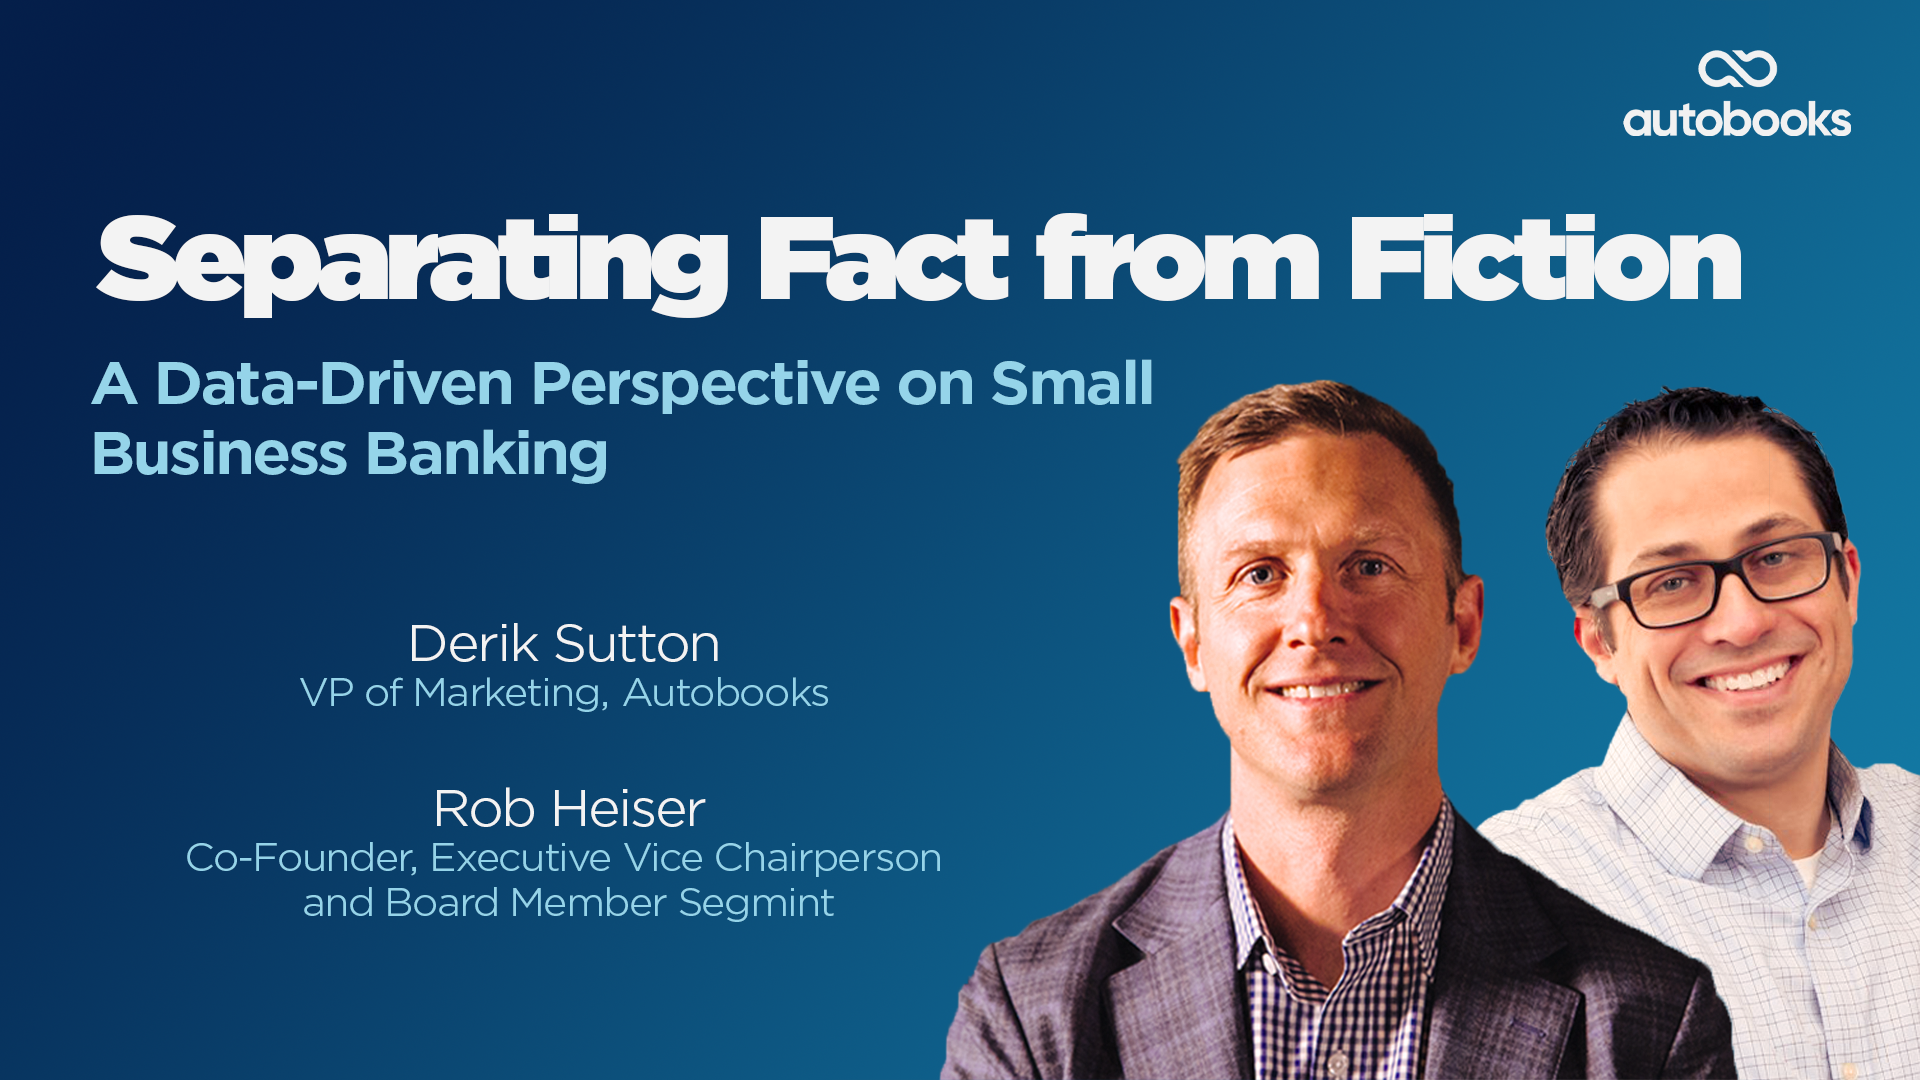 October Monthly Webinar - Separating Fact from Fiction